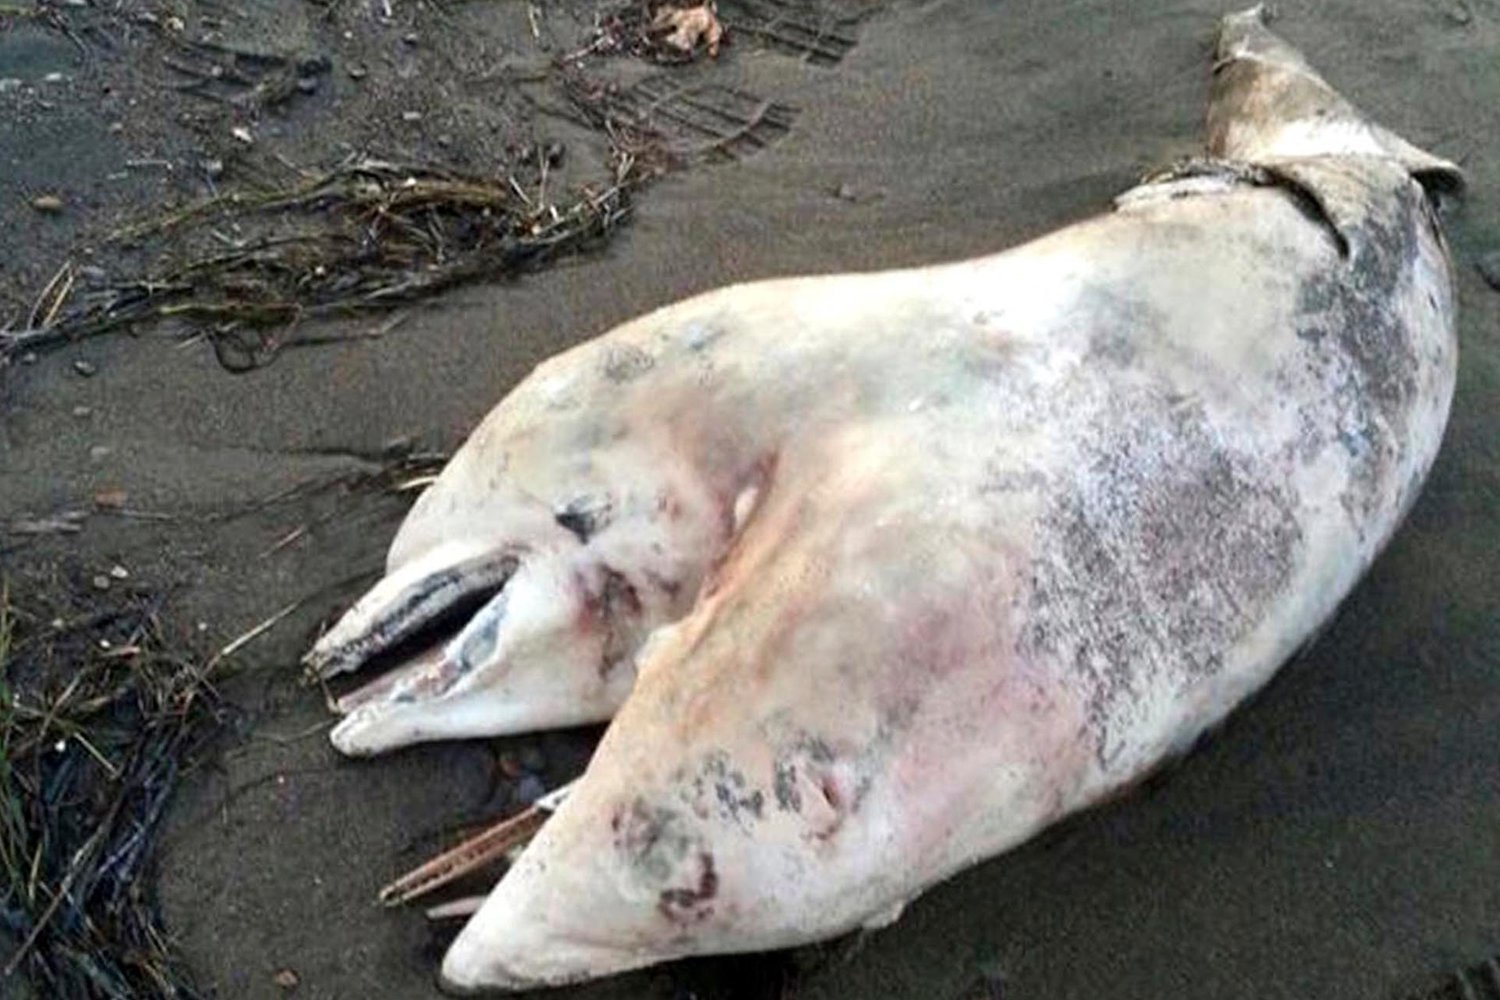 Tugrul, a sports teacher, made a shocking scientific discovery purely by accident in 2014.
A two-headed dolphin washed up on the shores on the west coast of Turkey while he was out for a walk. Unfortunately, it was deceased but biologists determined that its condition was the result of something similar to conjoined human twins.